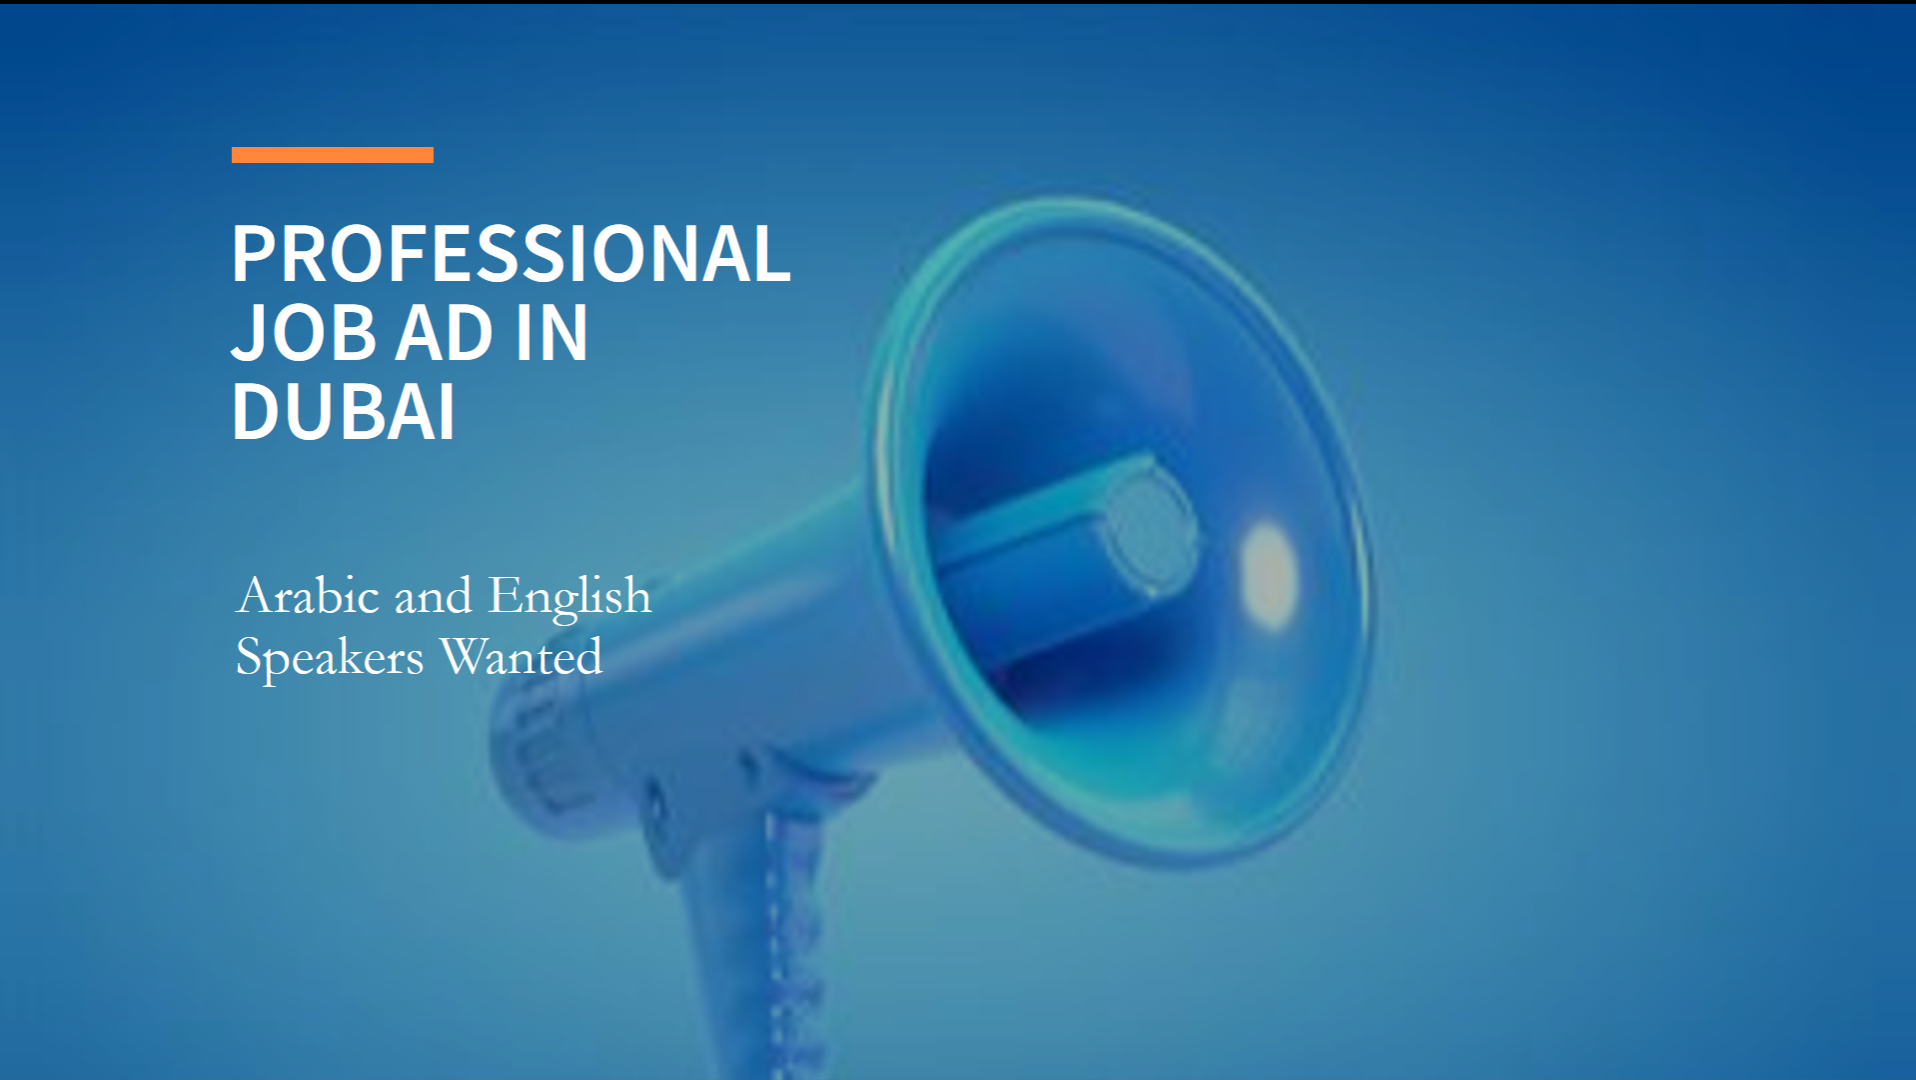 Job opportunities in dubai for Arabic and English speakers with salary 12,000 AED